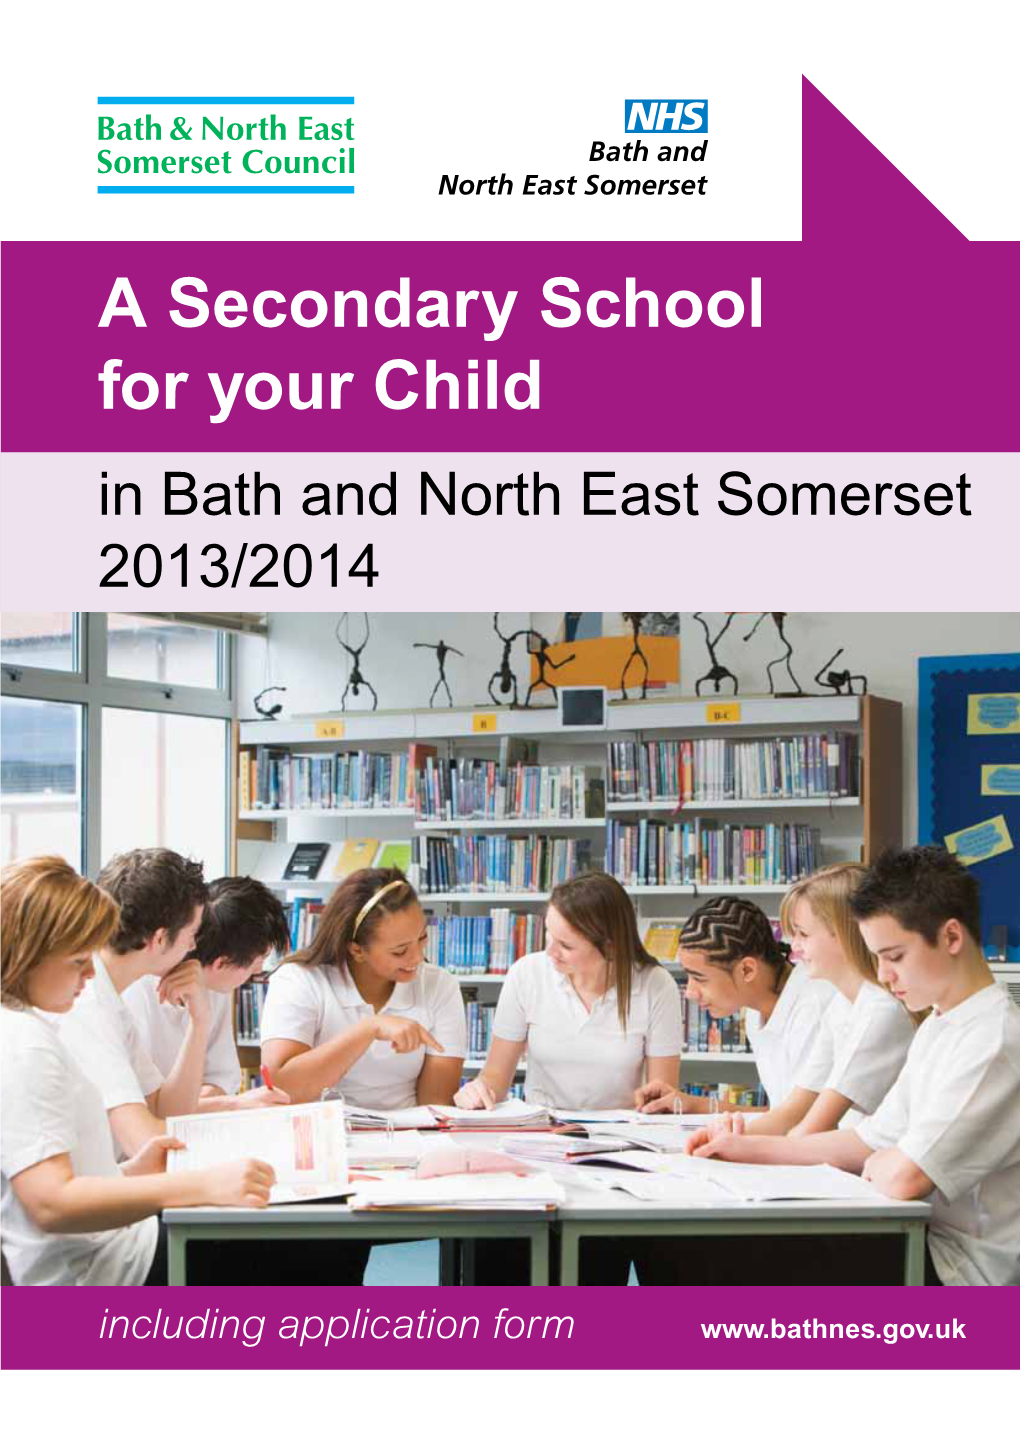 A Secondary School for Your Child 2013-2014 1